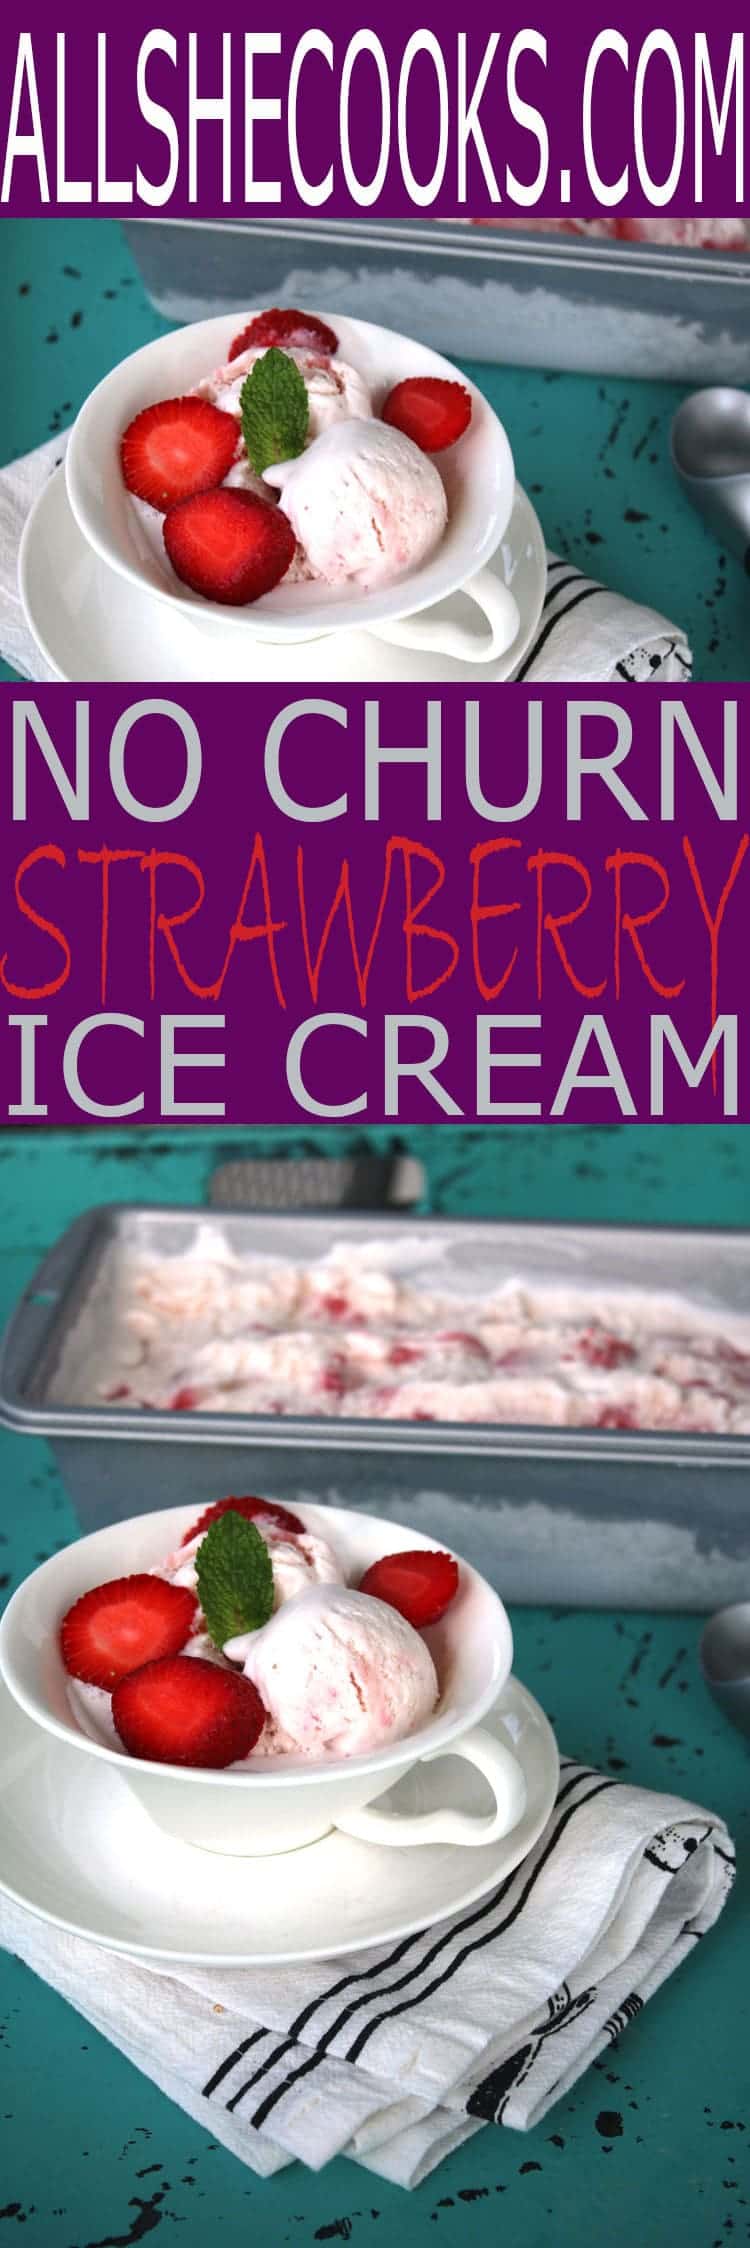 Make this easy No Churn Strawberry Ice Cream at home for a delicious fresh homemade dessert everyone will love. Add in mix-ins for a fun twist.